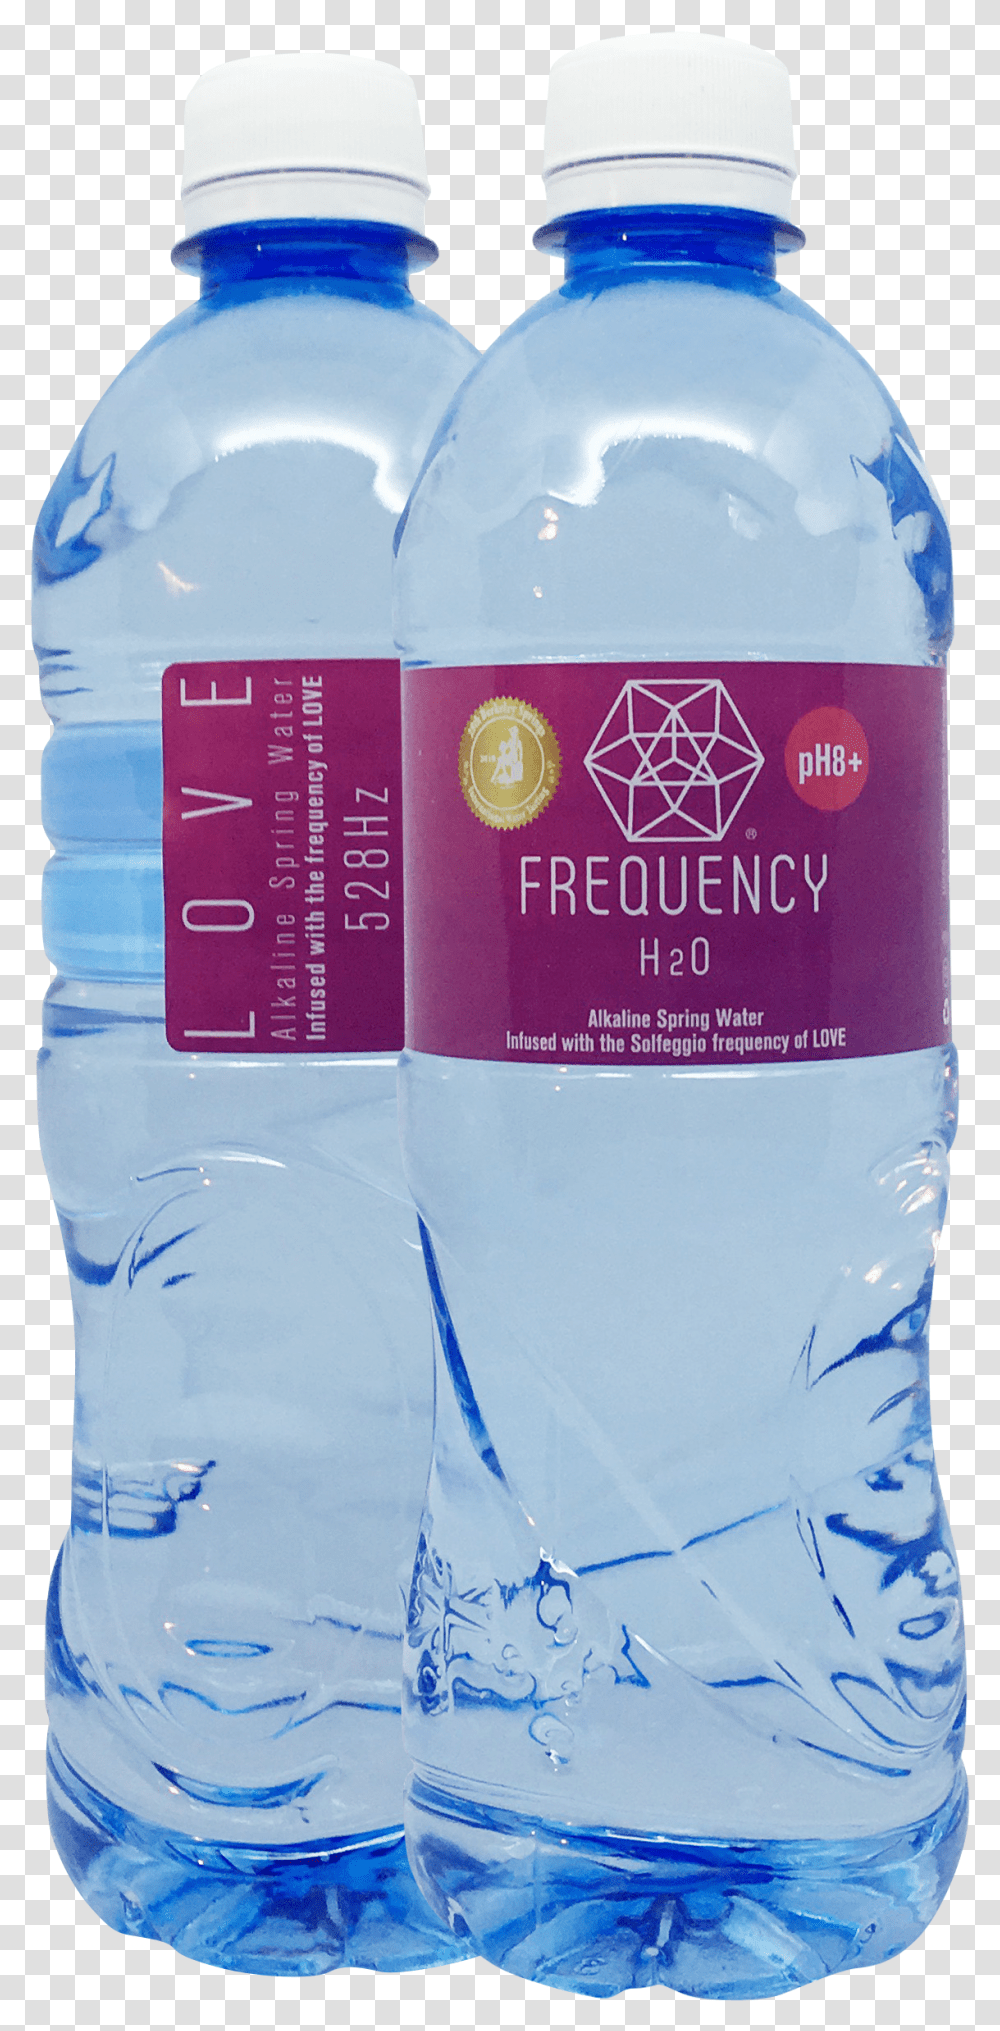 Love Frequency 21 X 600mlClass Lazyload Lazyload Frequency H2o Alkaline Spring Water Love, Bottle, Beverage, Drink, Liquor Transparent Png